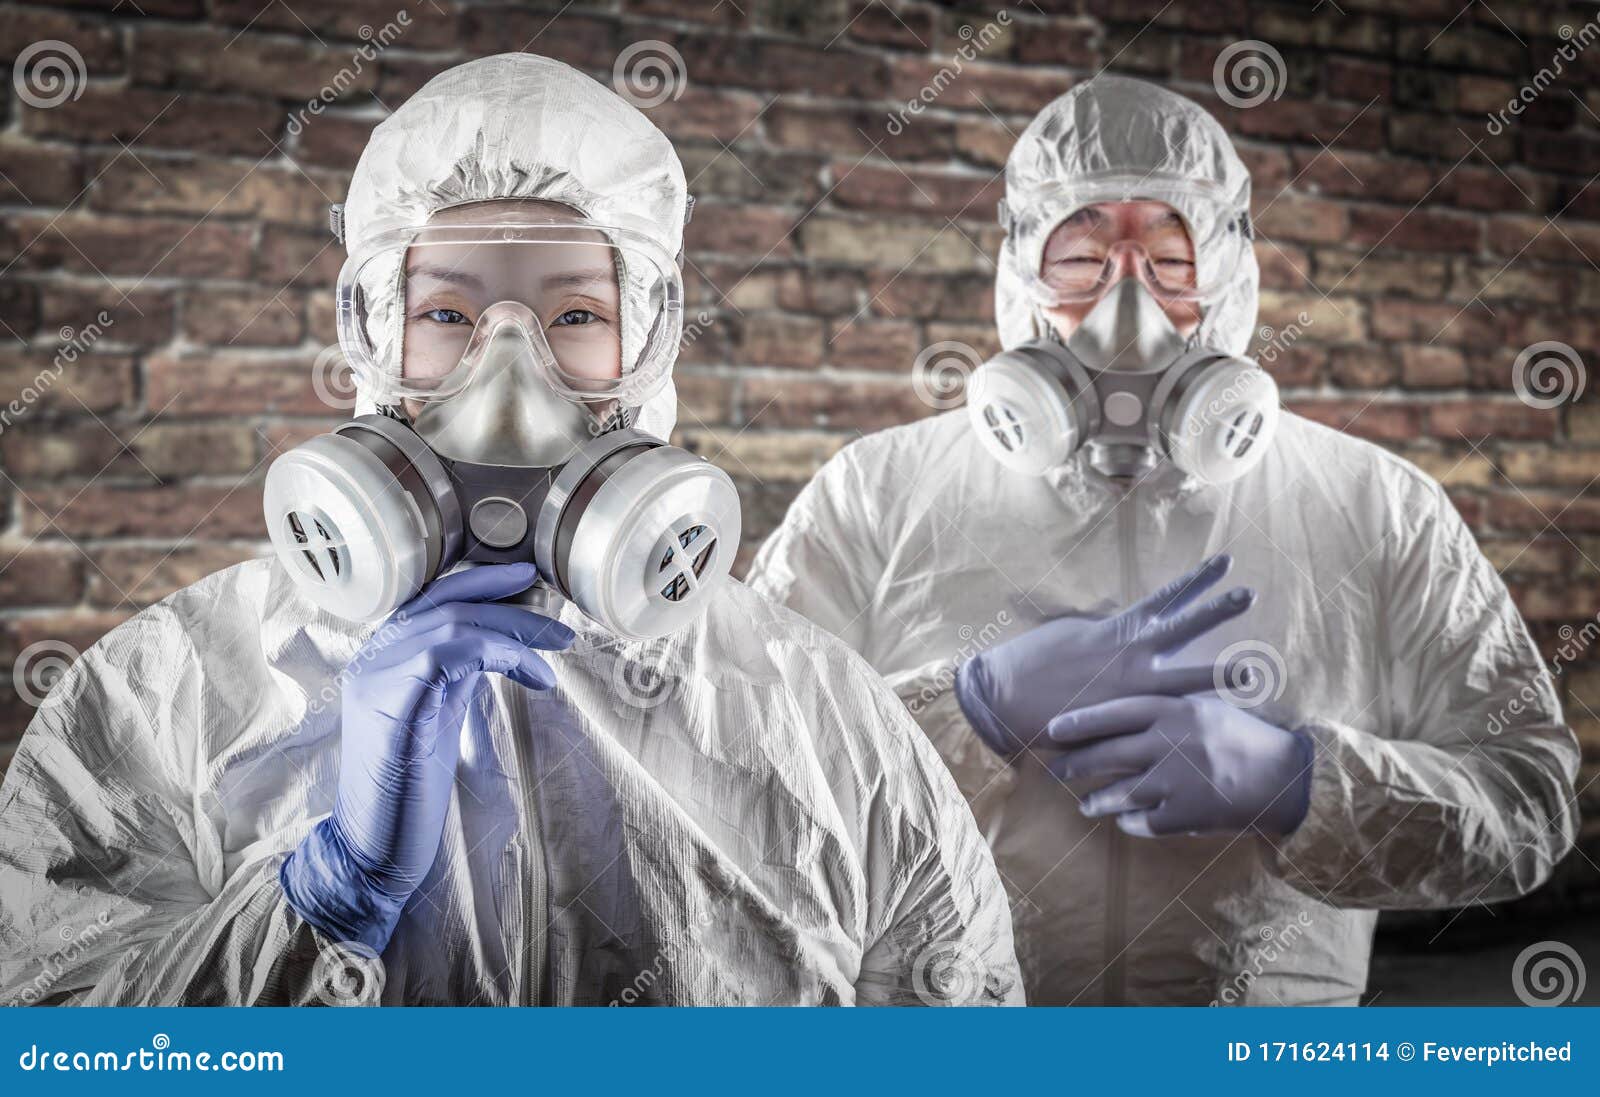 chinese woman and man in gas masks, goggles and hazmat suites against brick background